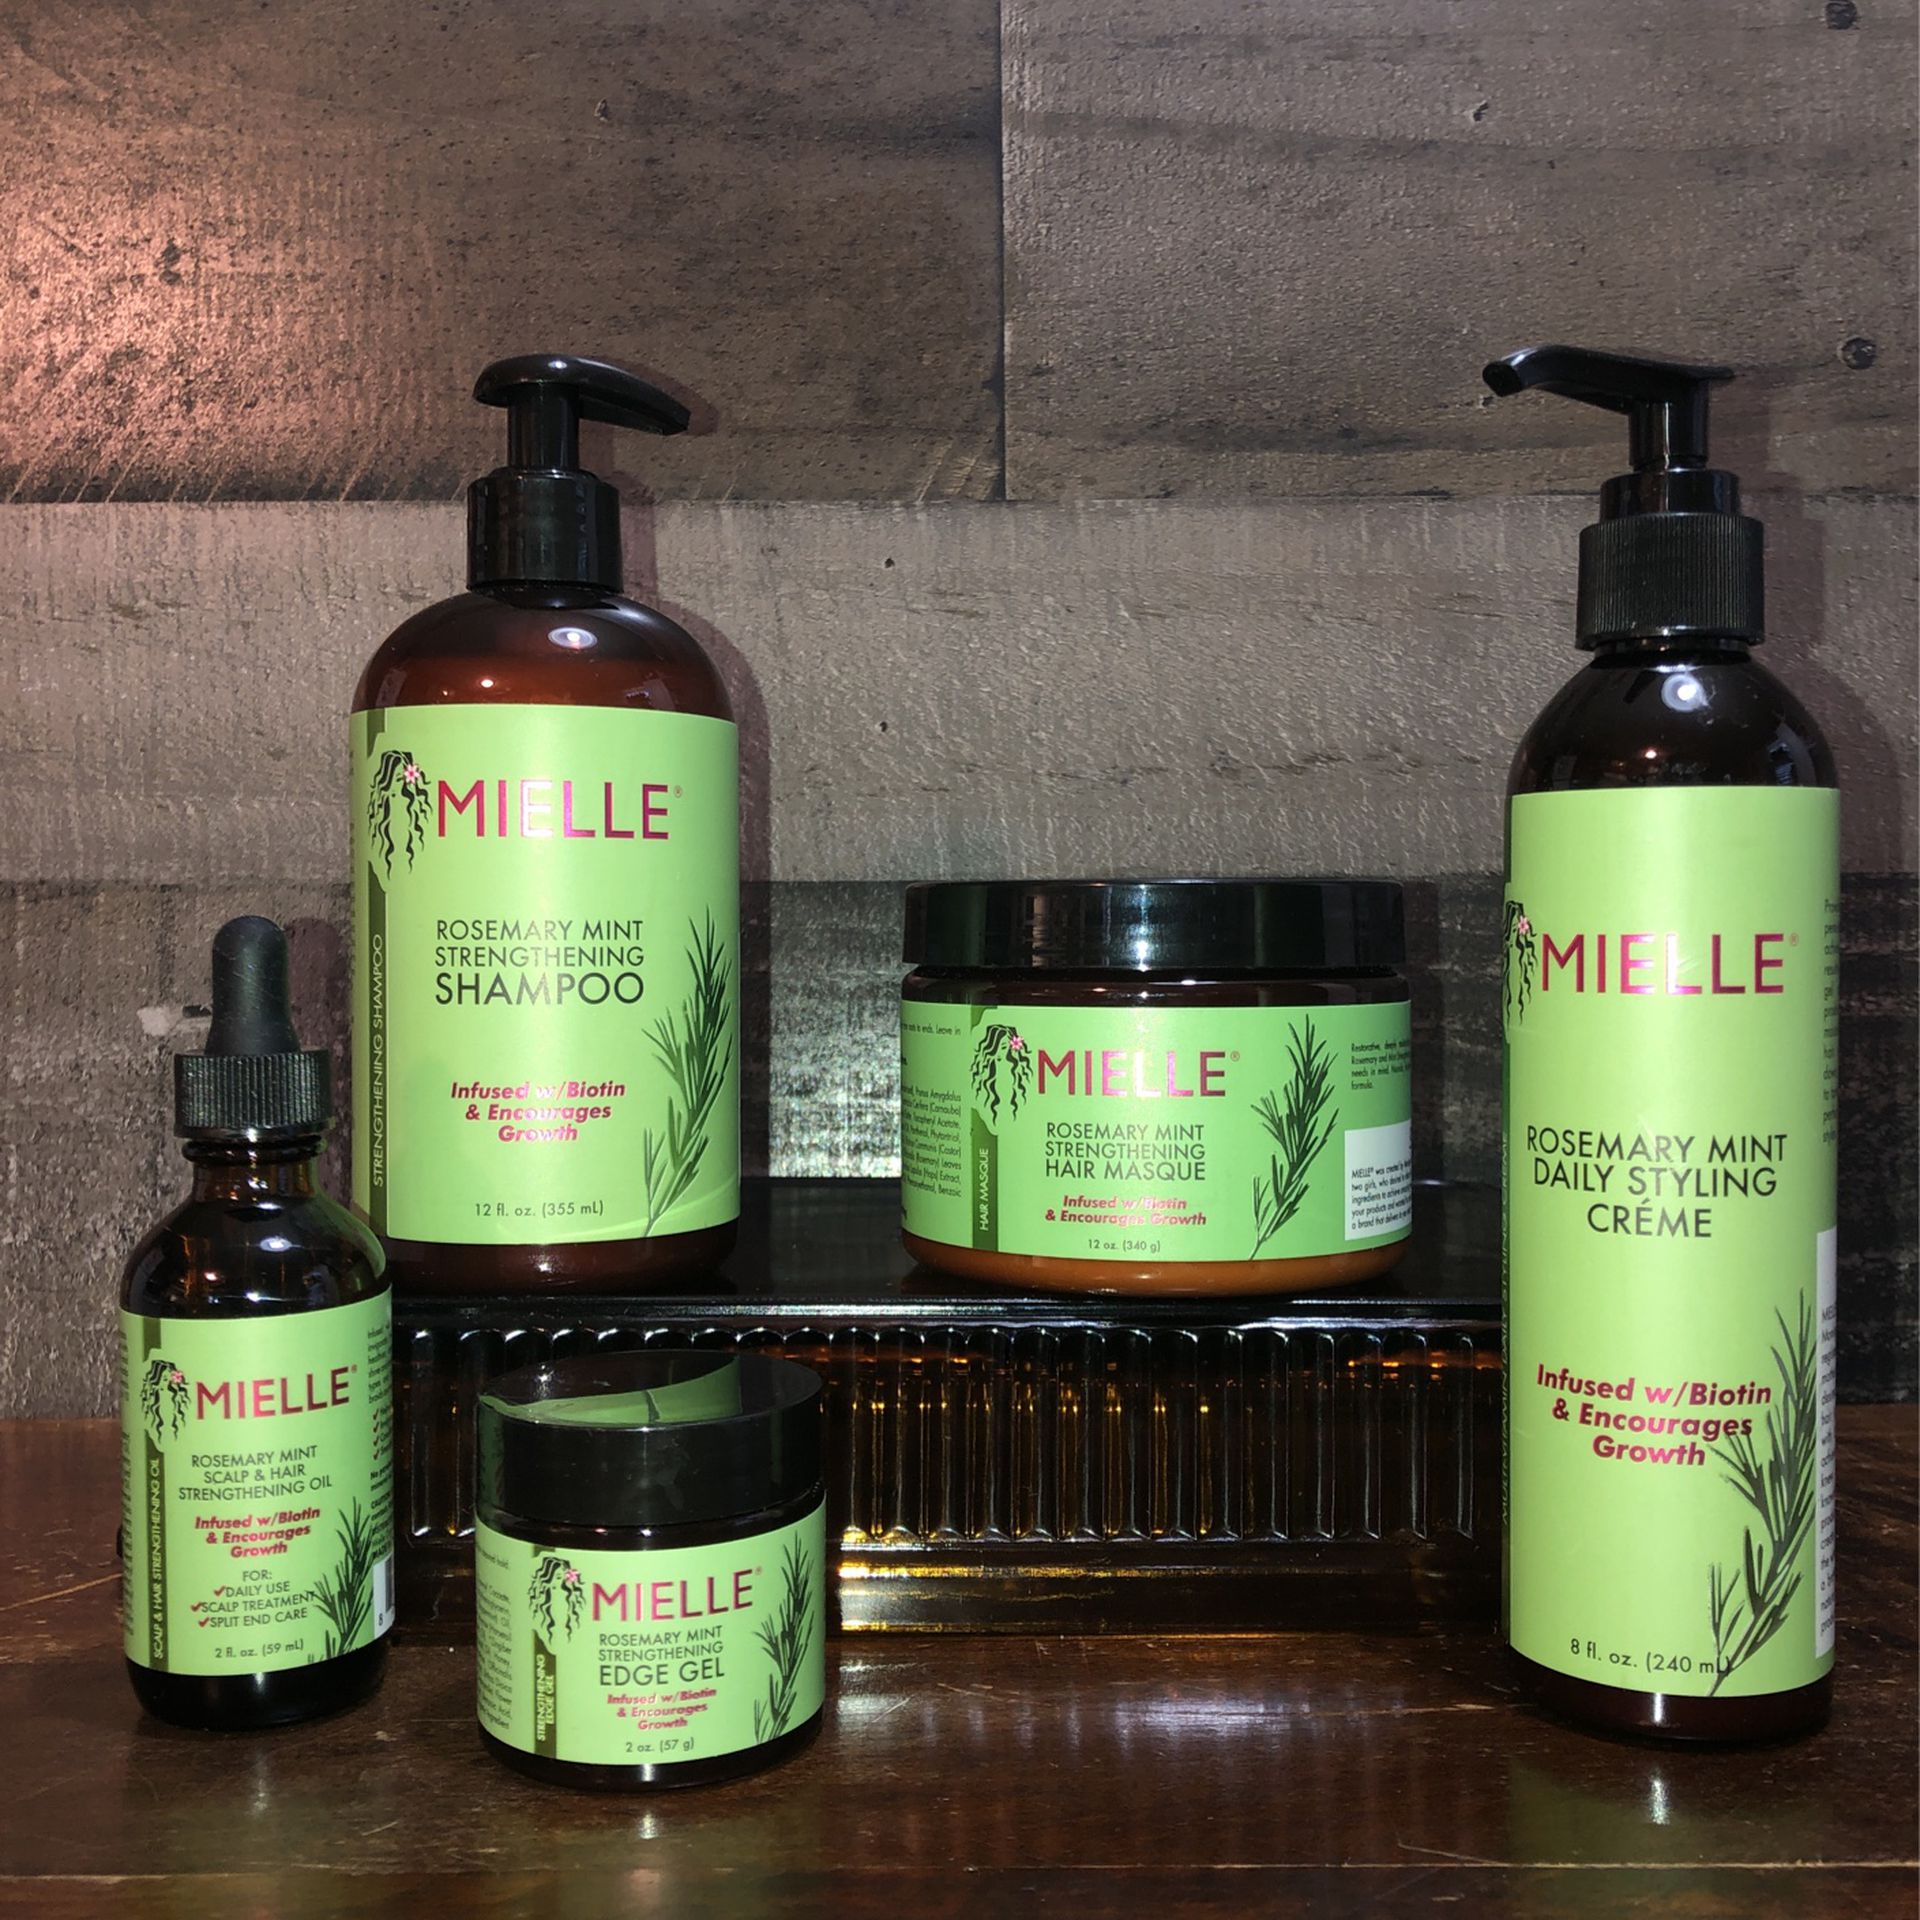 All Brand NEW! ❇️   Mielle brand Hair Care Products - RoseMary Mint (((PENDING PICK UP 5-6pm TODAY)))